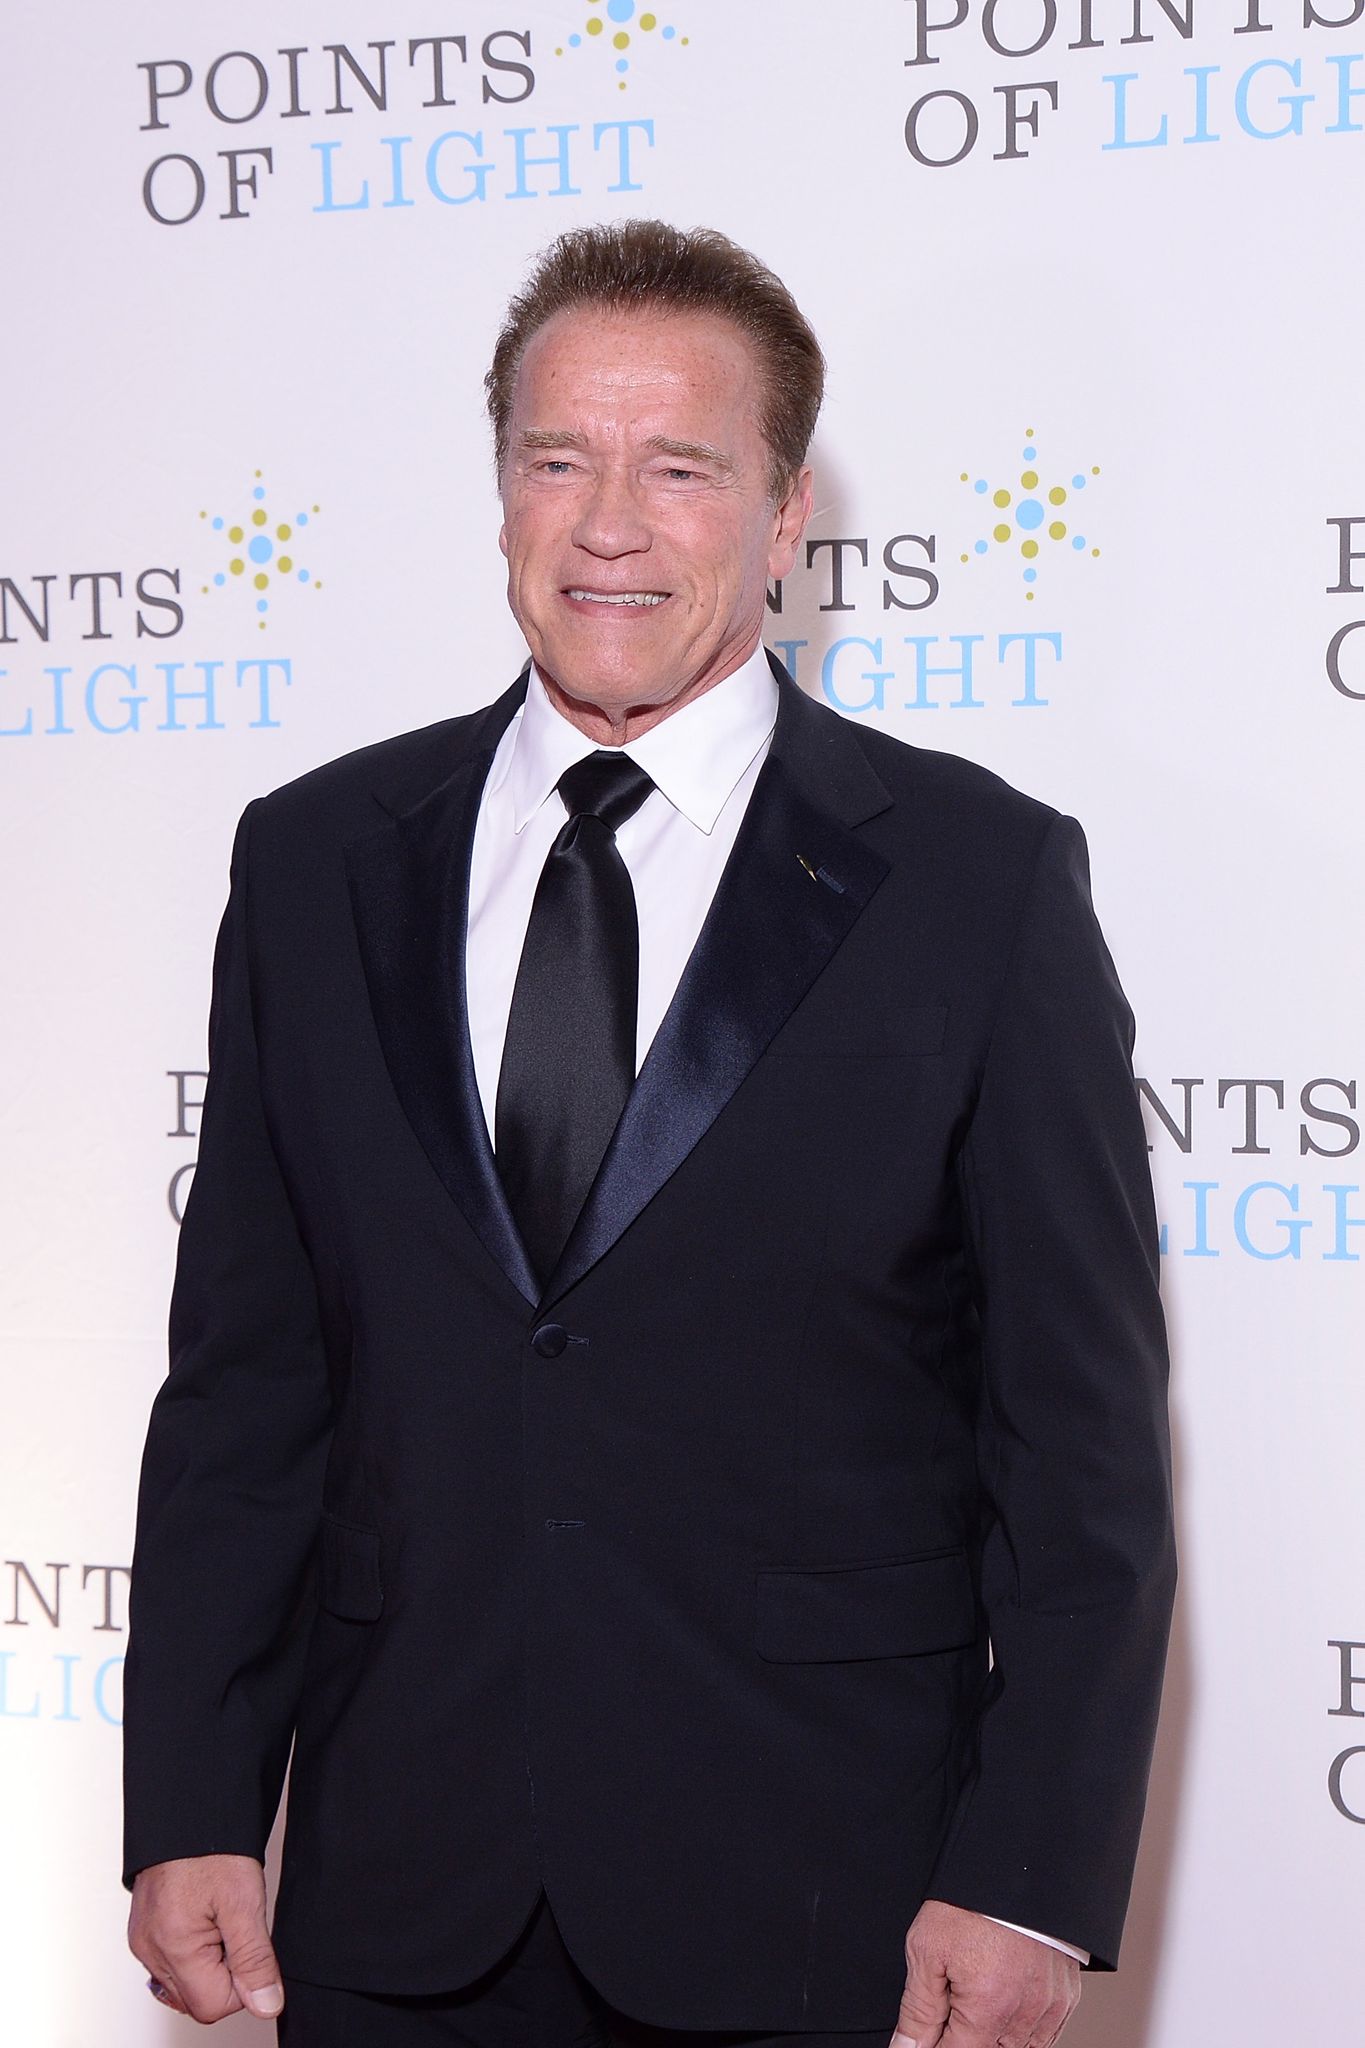 Former Governor of California and 2017 Points of Light Tribute Award Honoree, Arnold Schwarzenegger, attends the 2017 Points of Light Gala at the French Embassy on October 19, 2017. | Photo: Getty Images